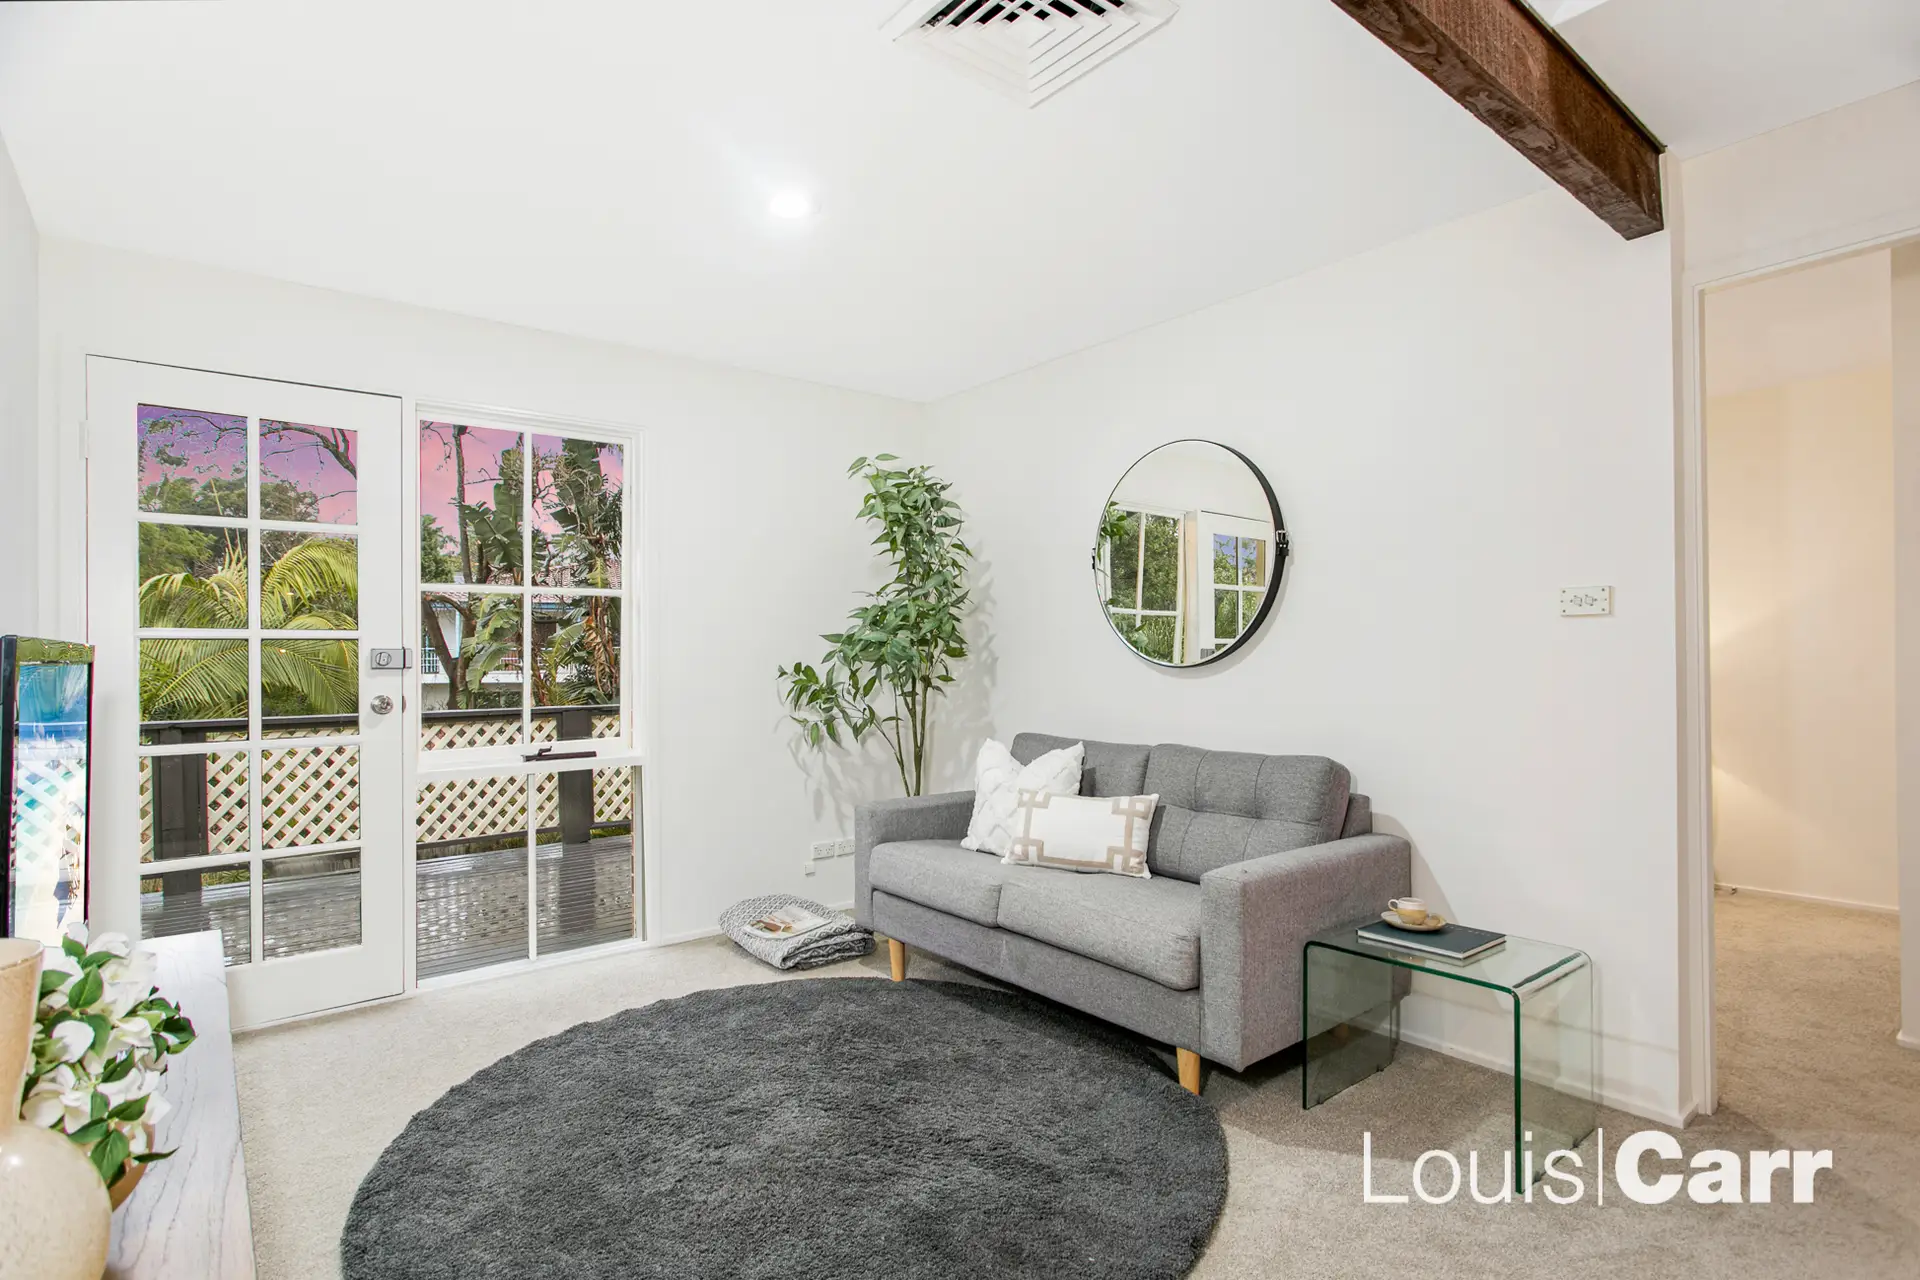 Photo #7: 7 Kambah Place, West Pennant Hills - Sold by Louis Carr Real Estate